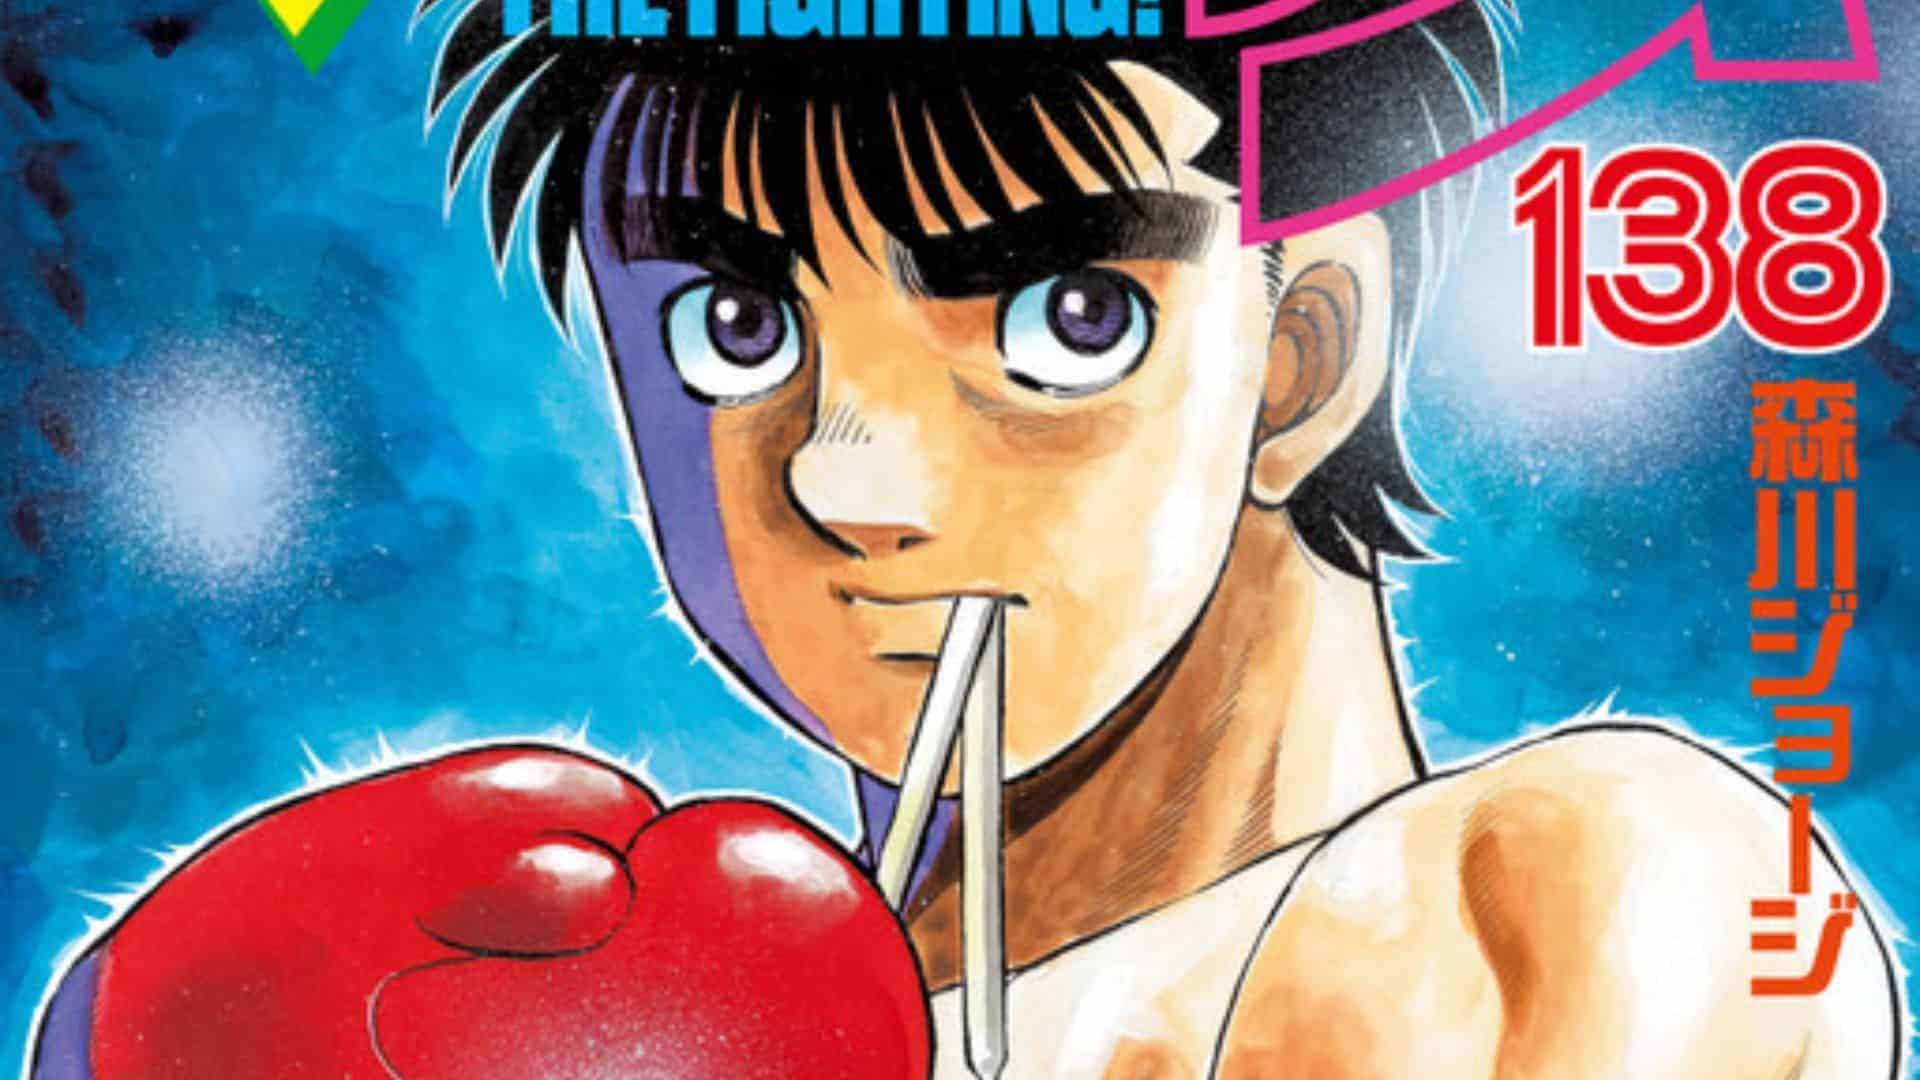 Hajime no Ippo Chapter 1436 Release Date & Where to Read